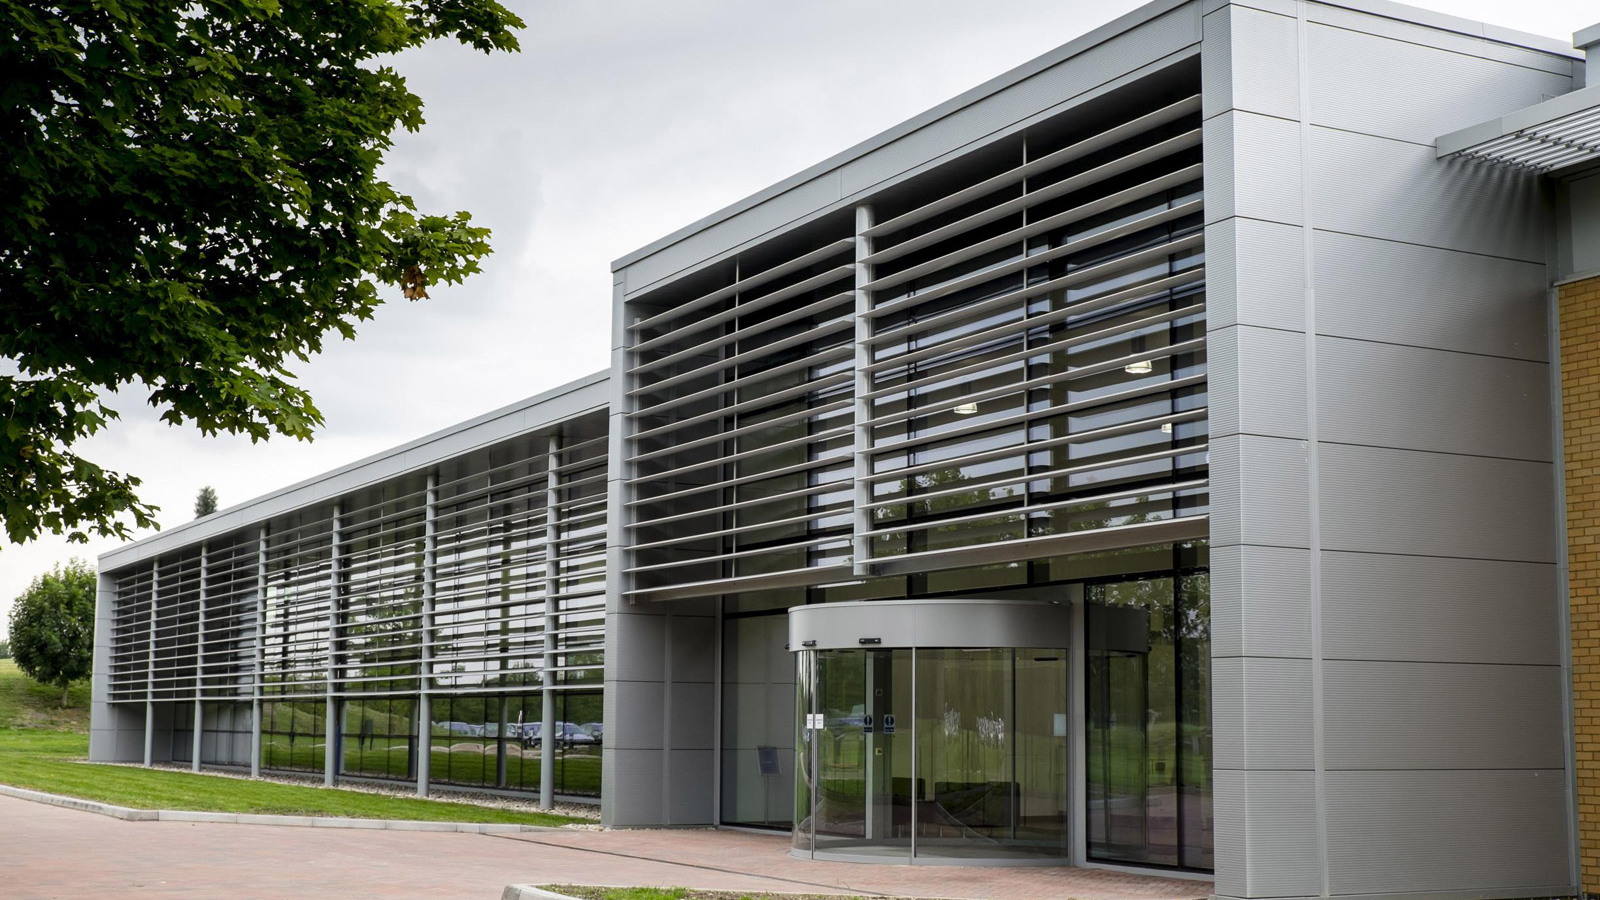 Williams Advanced Engineering in Oxfordshire, England